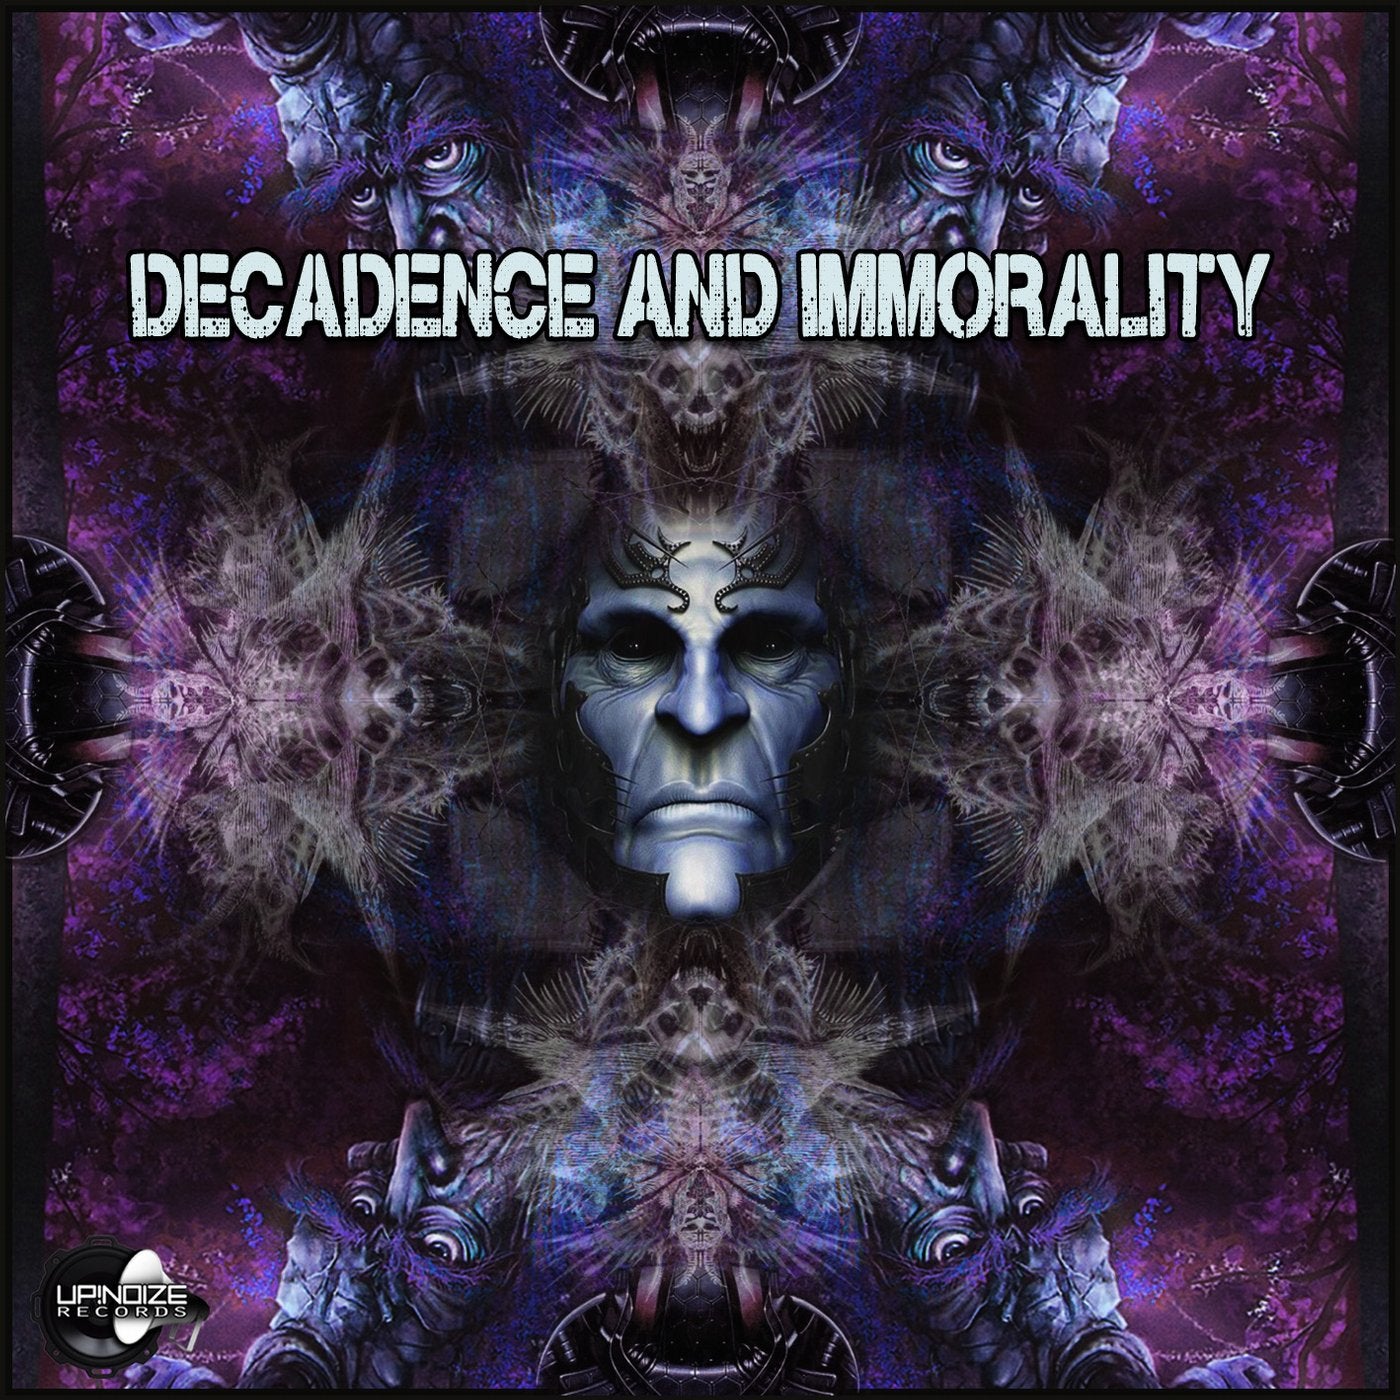 Decadence and Immorality